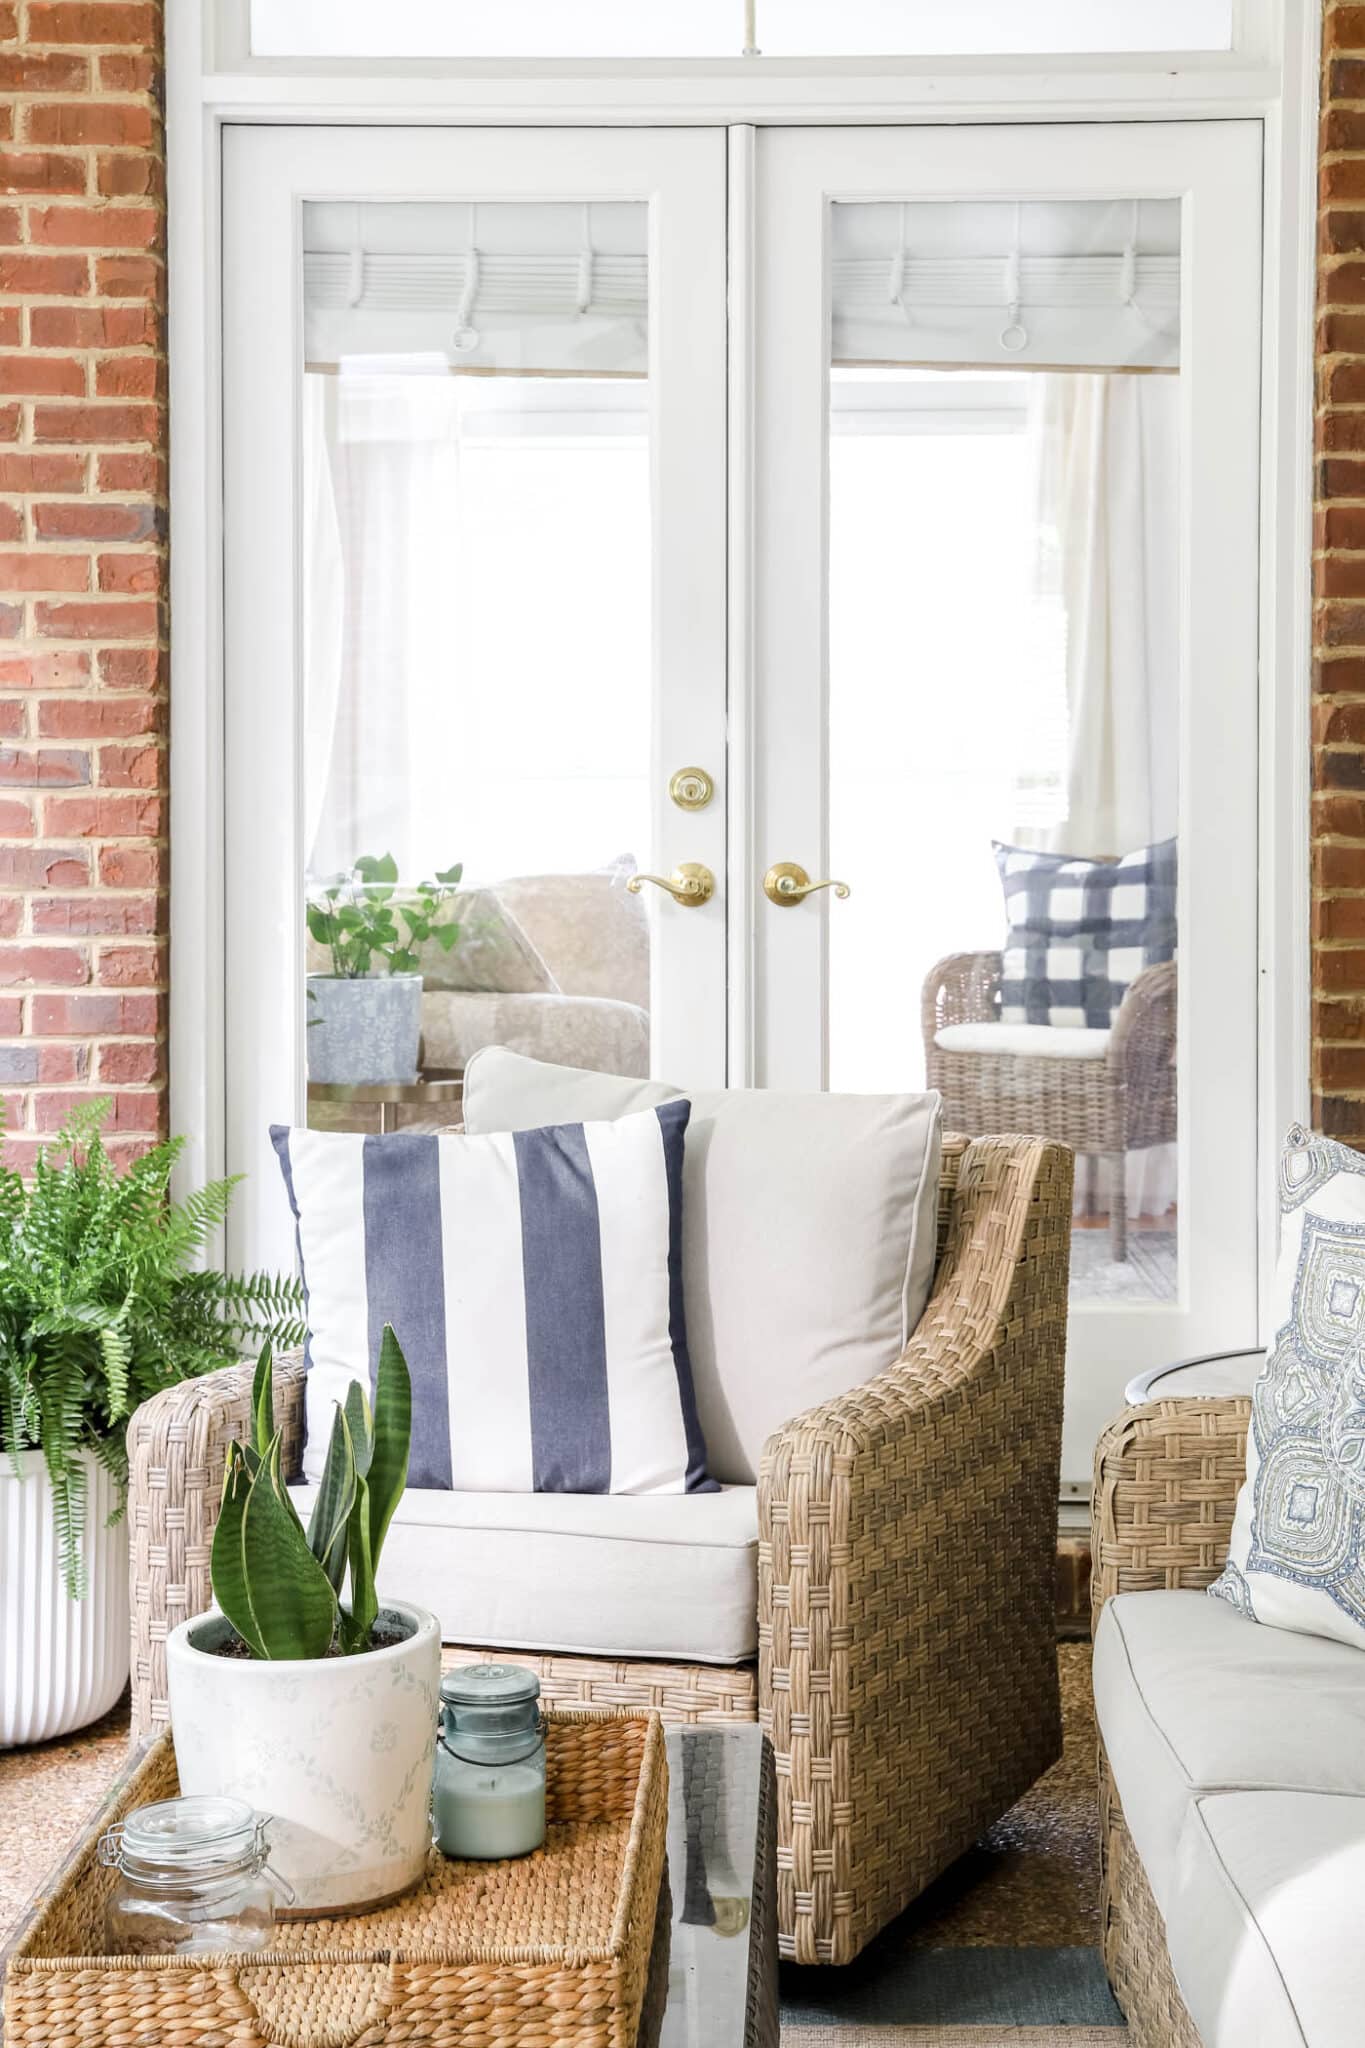 Wicker Patio Furniture From BHG: Strong, Affordable, Stylish